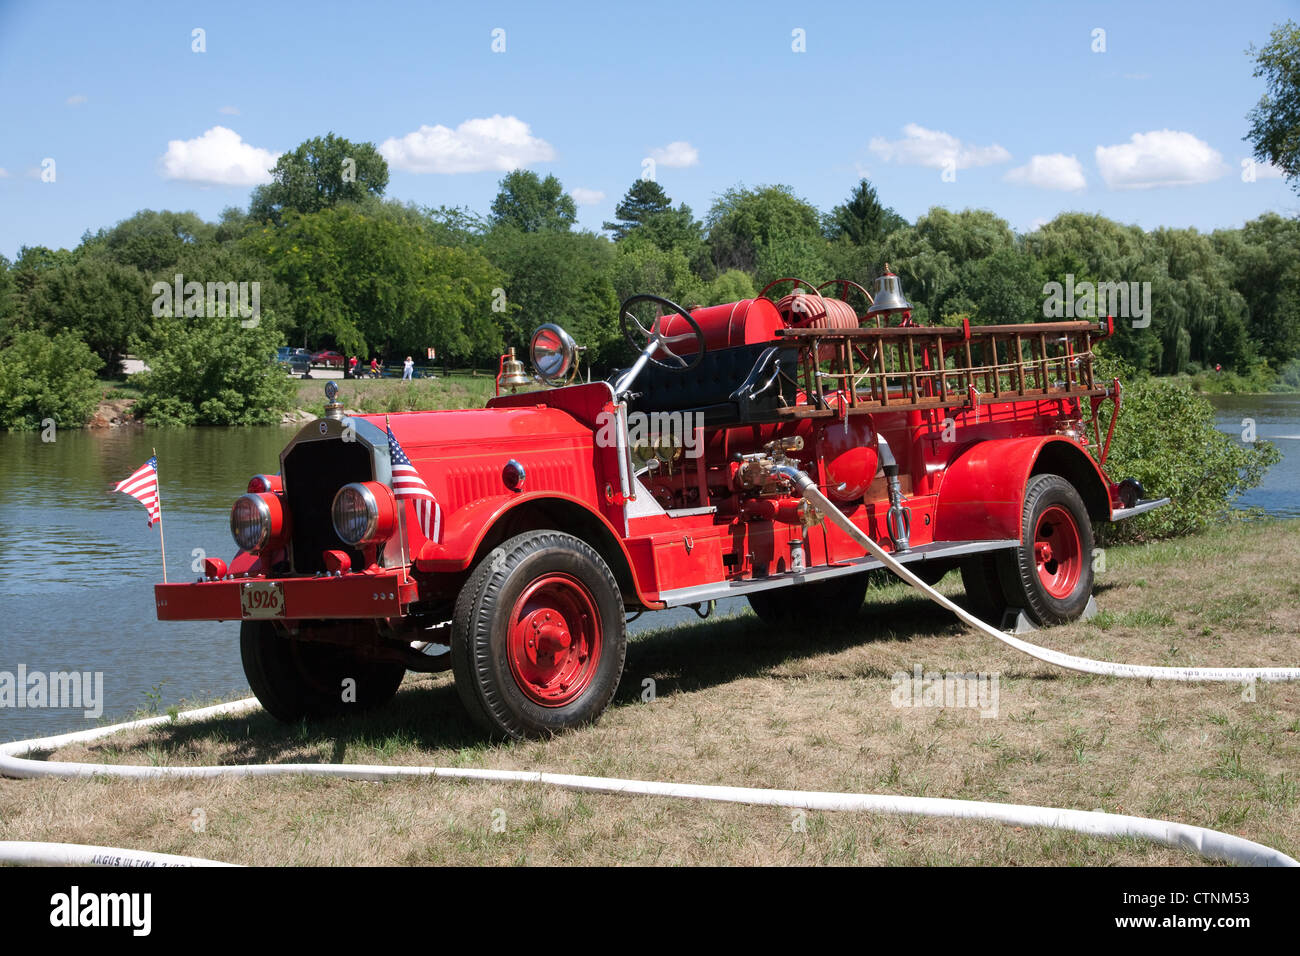 1926 Childs Fire Engine Pumper pumping drafting and pumping water along the Cass River, Frankenmuth, Michigan USA 2012 Stock Photo